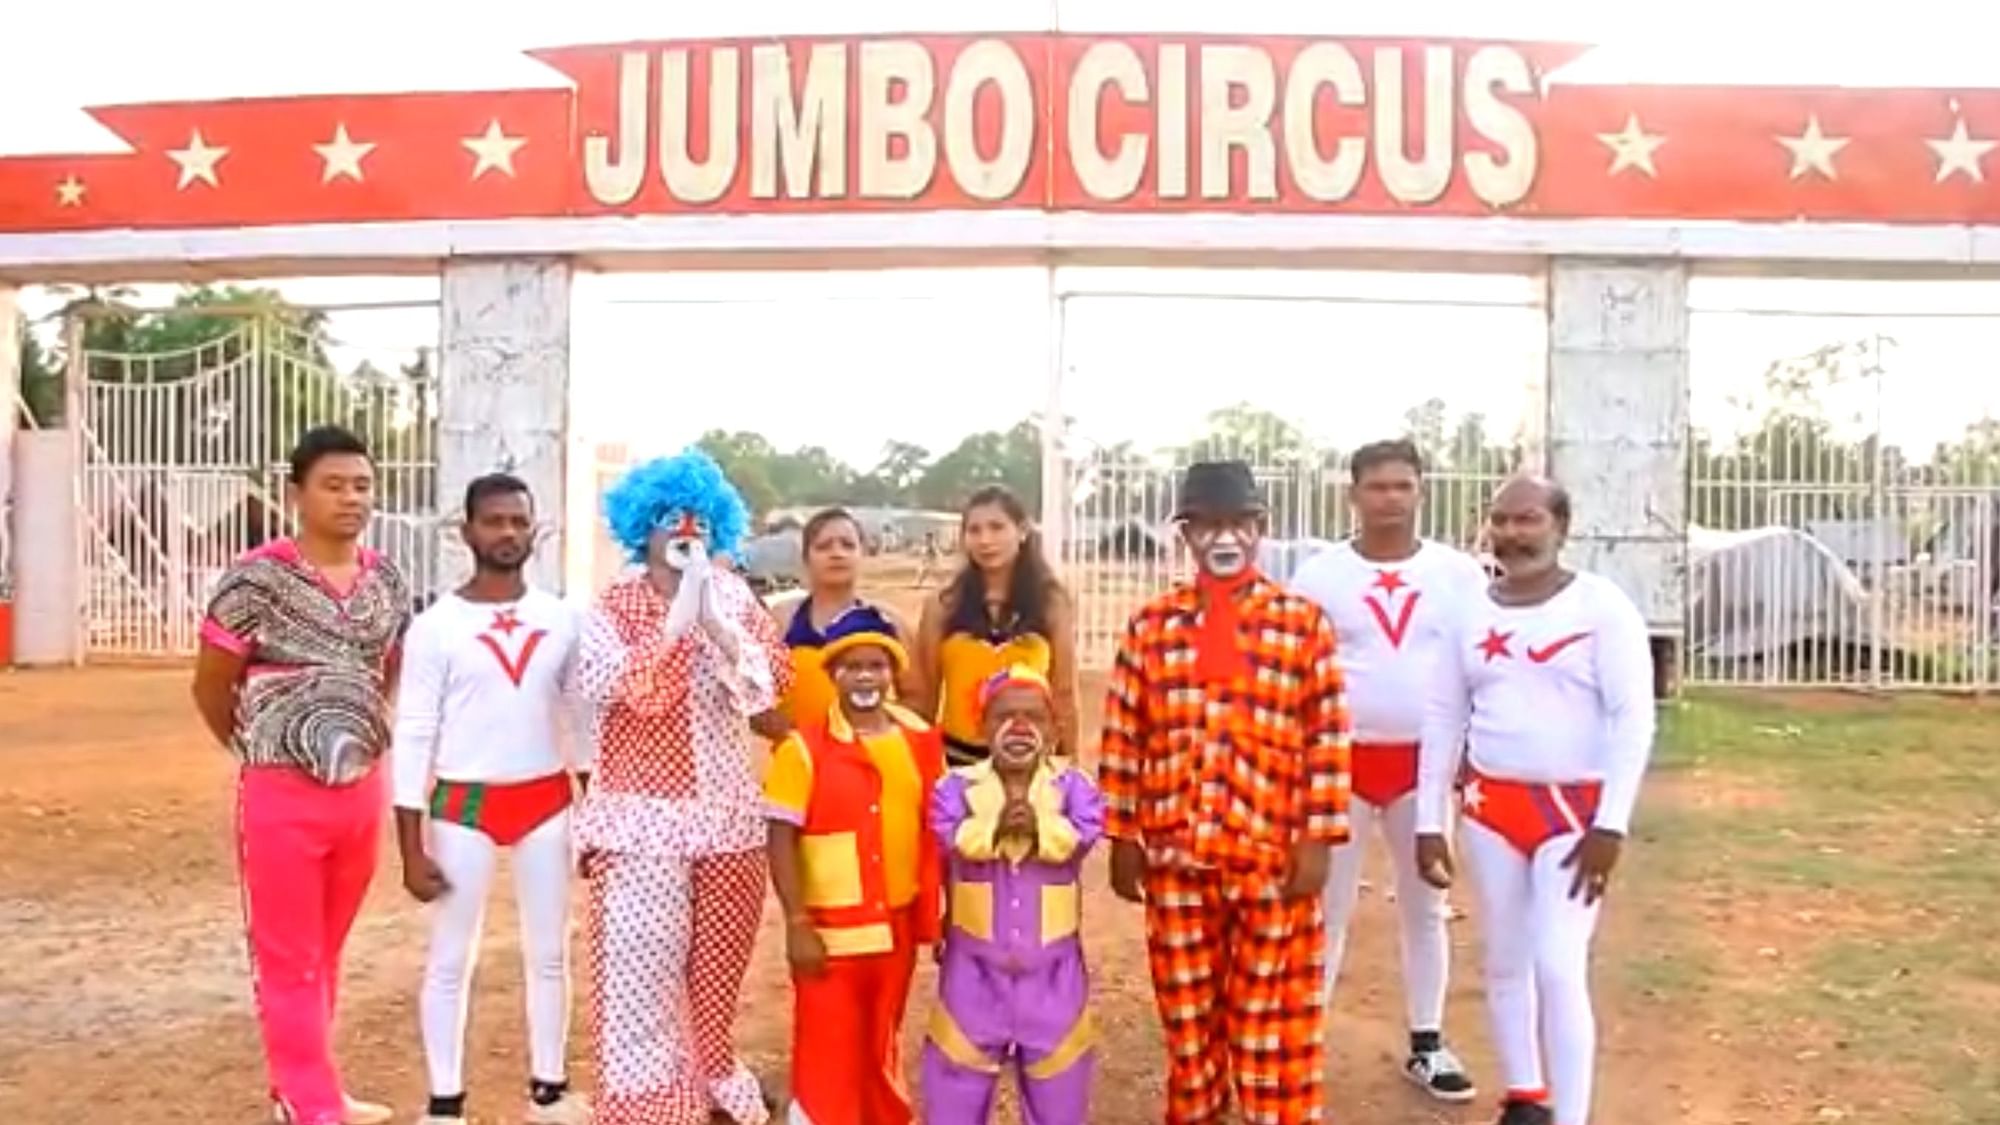 Jumbo circus, a branch of the iconic Gemini circus which was started in 1951, is now in an absolute limbo due to the lockdown and has appealed to the government for aid to ensure the business doesn’t collapse.